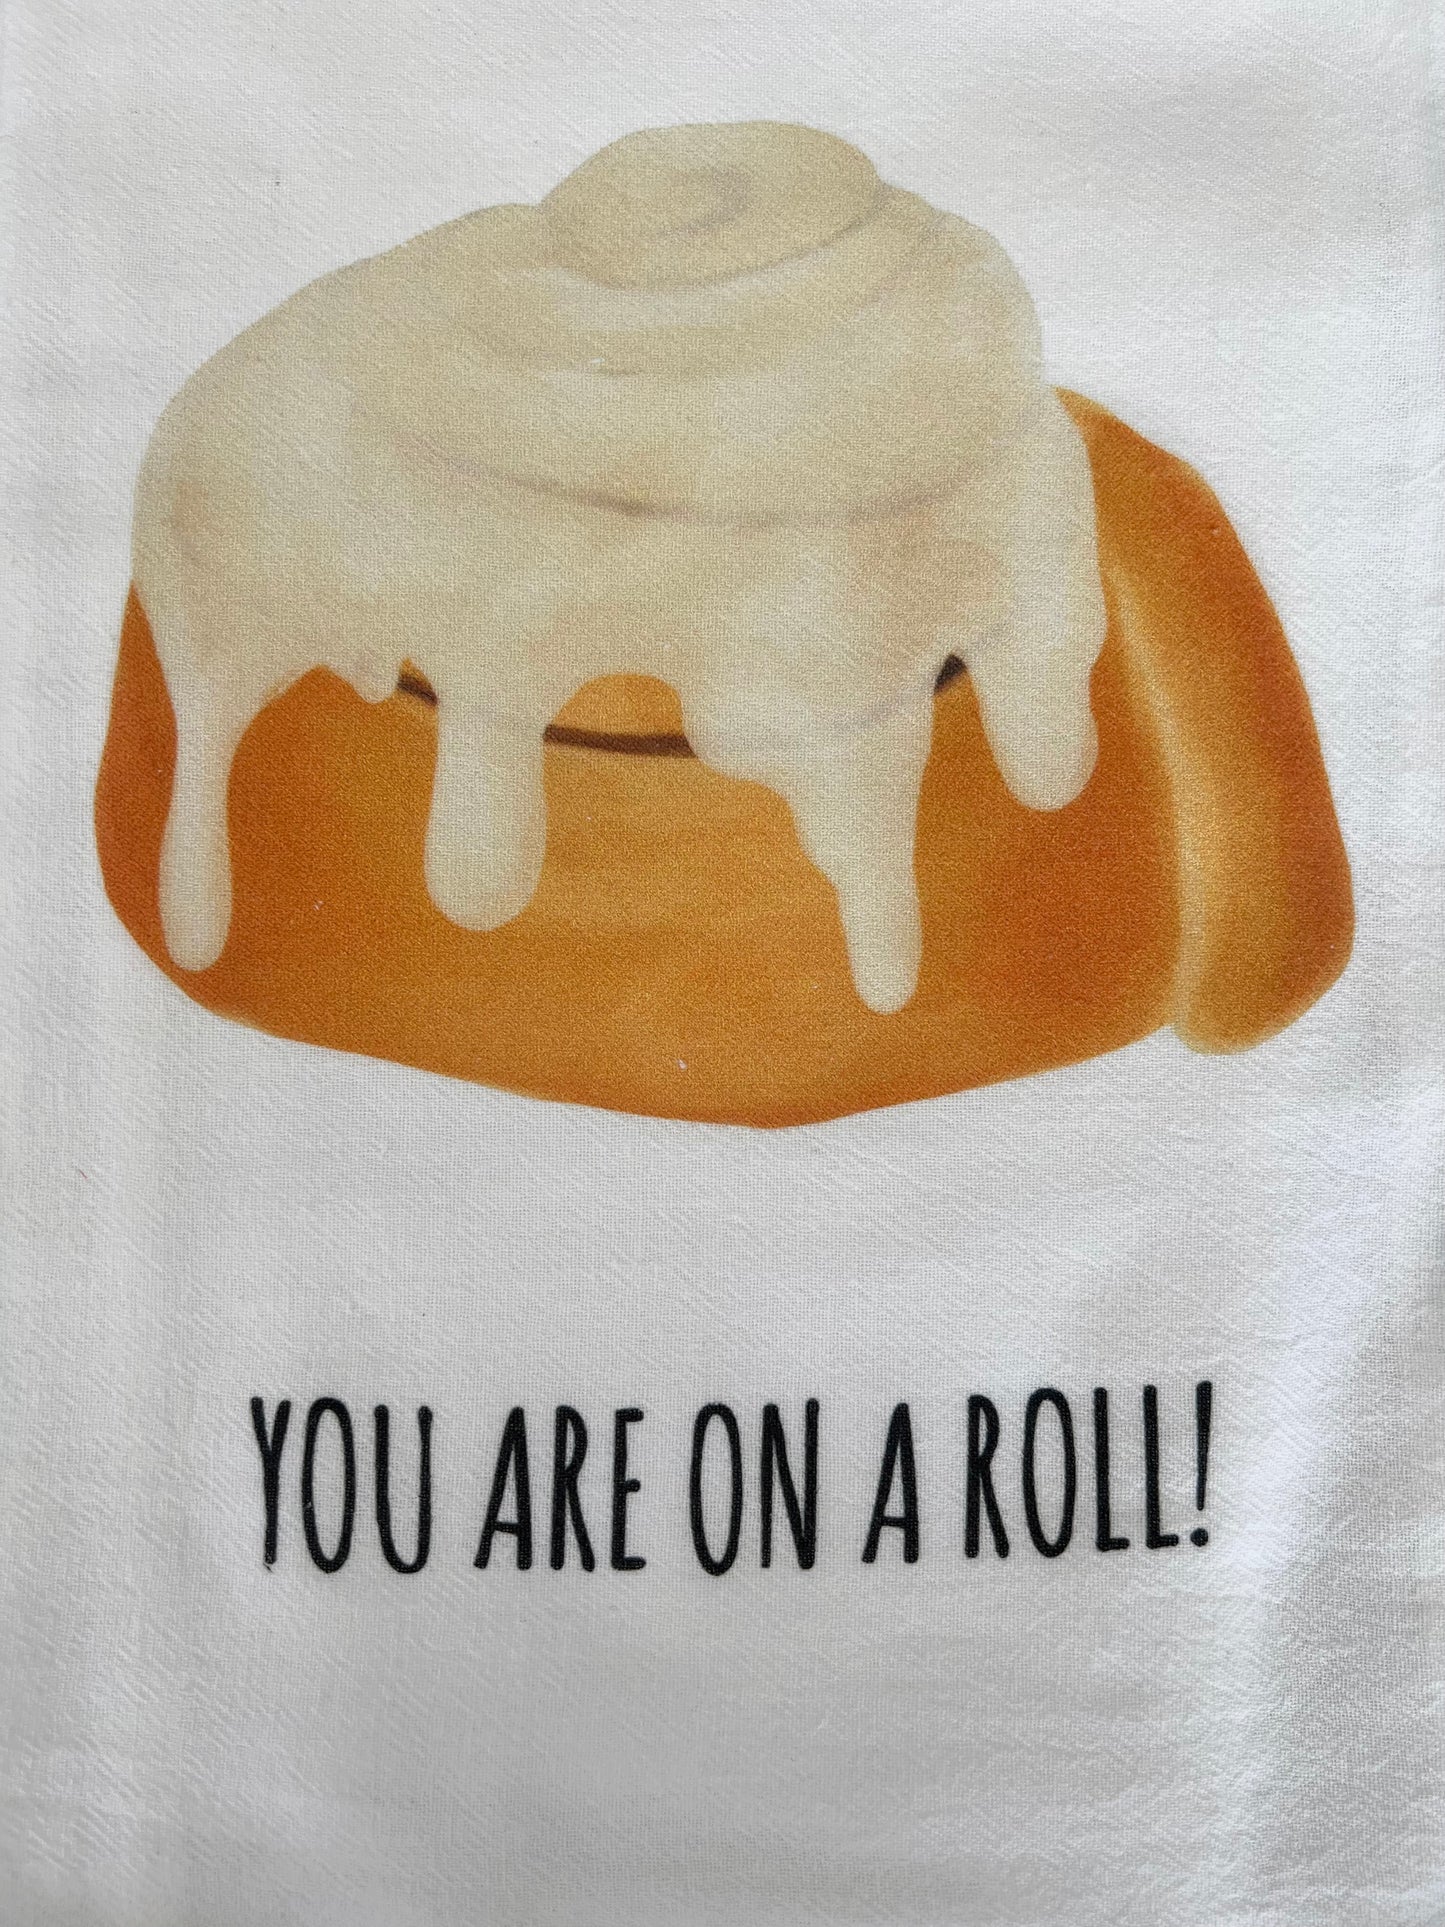 You Are On A Roll!